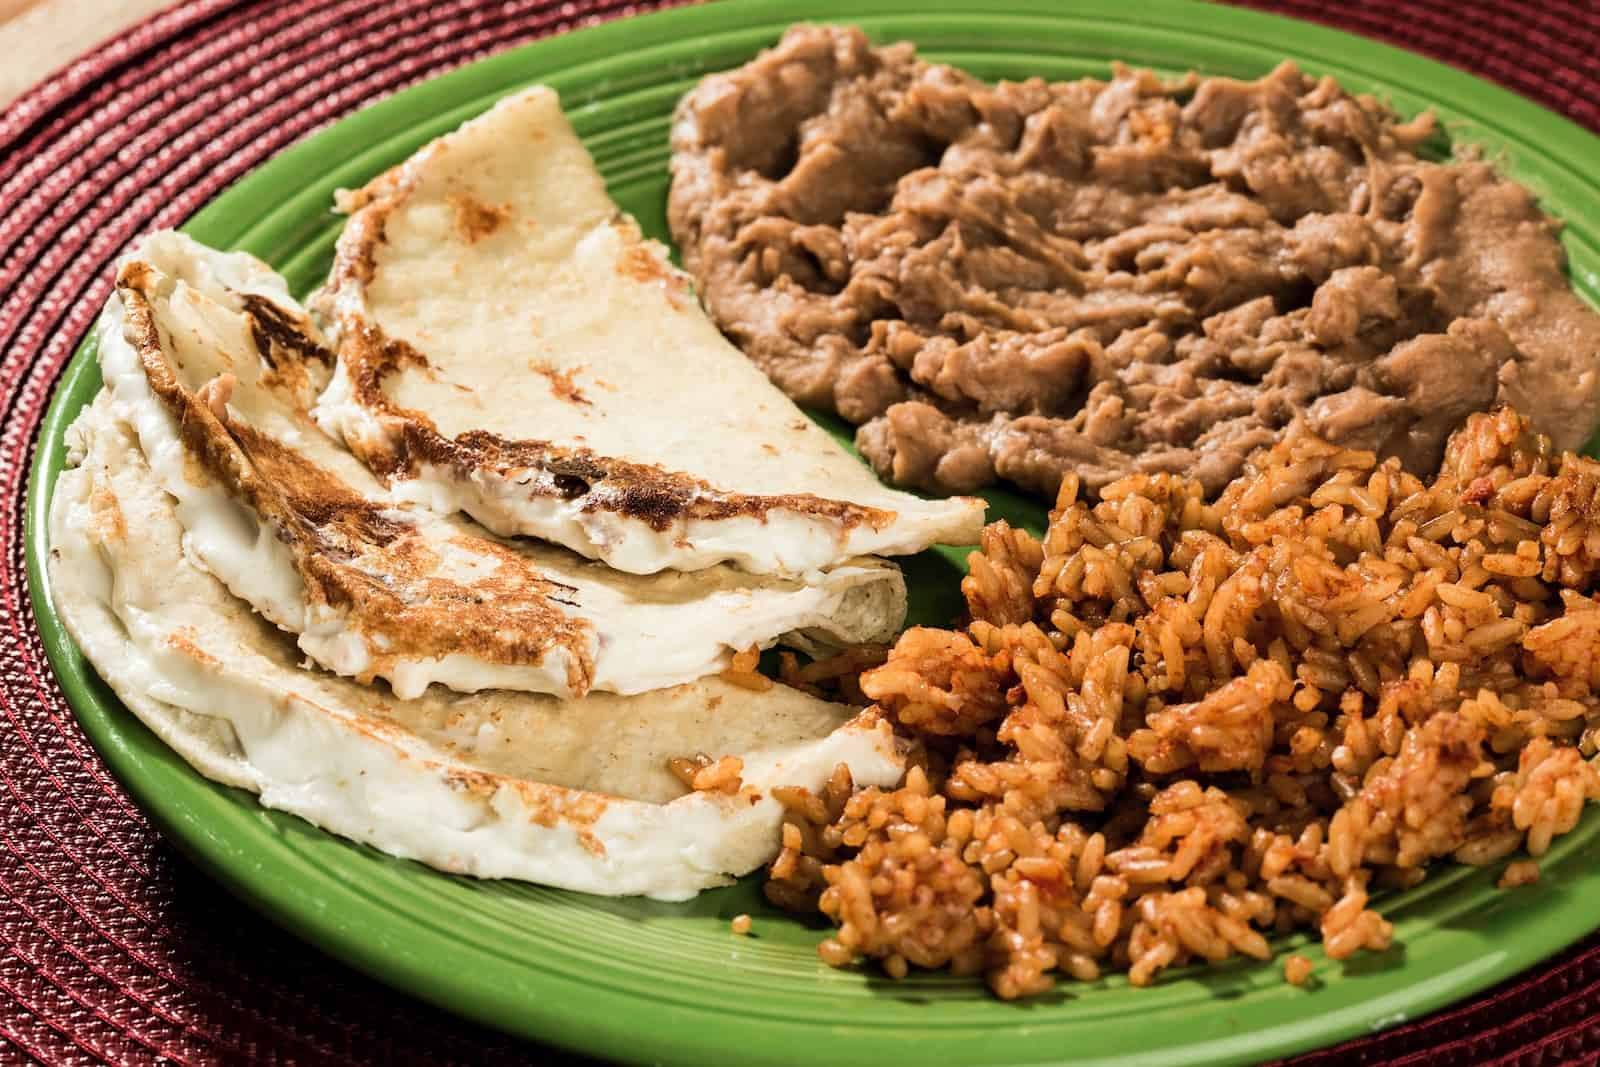 fried rice, beans, and mexican quesadilla on green ceramic plate